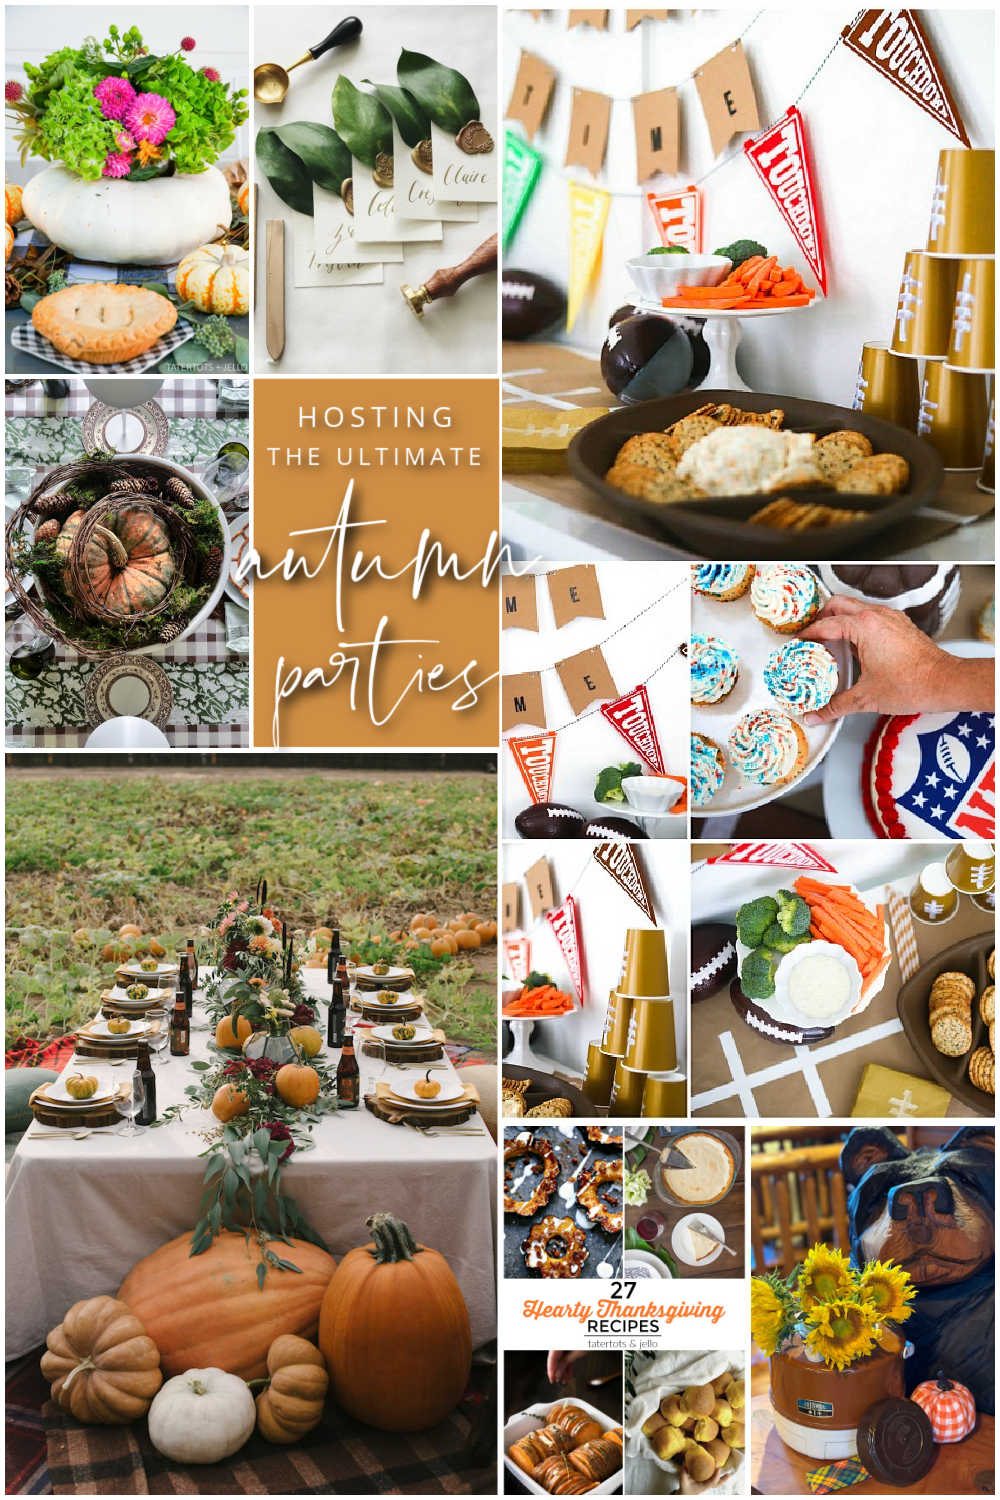 Hosting the Ultimate Autumn Parties. DIY projects, delectable recipes, and inspiring links to make your autumn celebrations unforgettable.